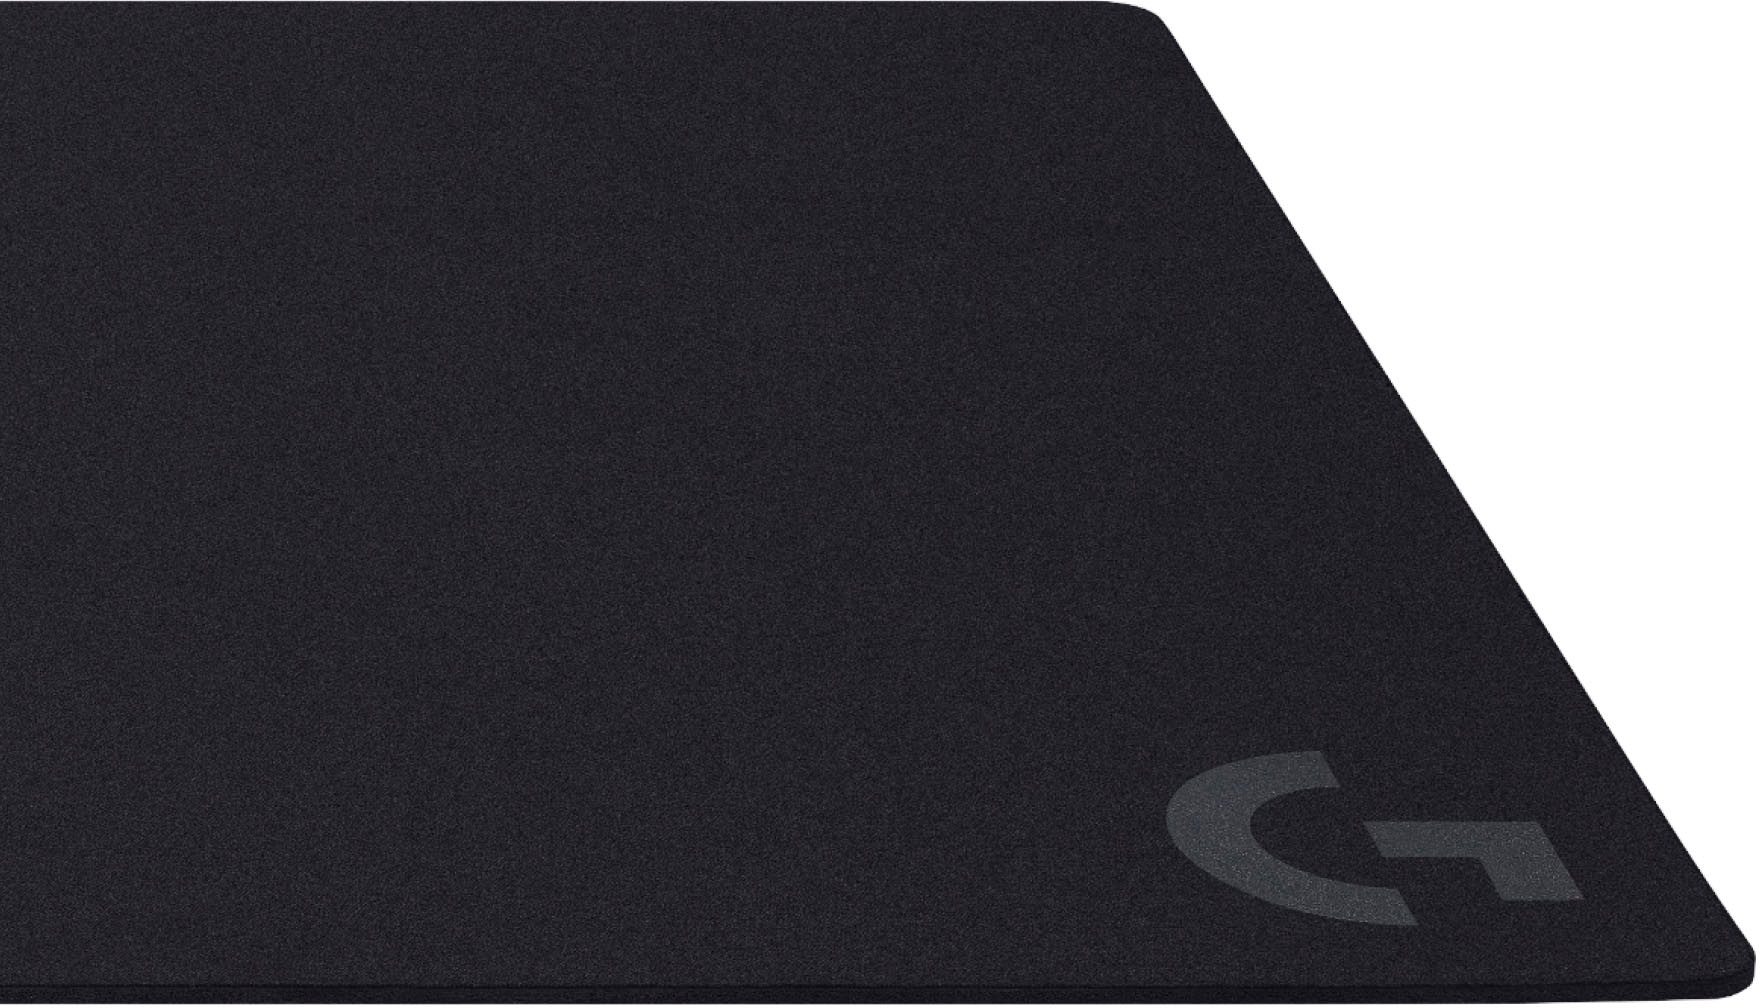 Logitech G840 Cloth Gaming Mouse Pad with Rubber Base (Extra Large) Black  943-000776 - Best Buy